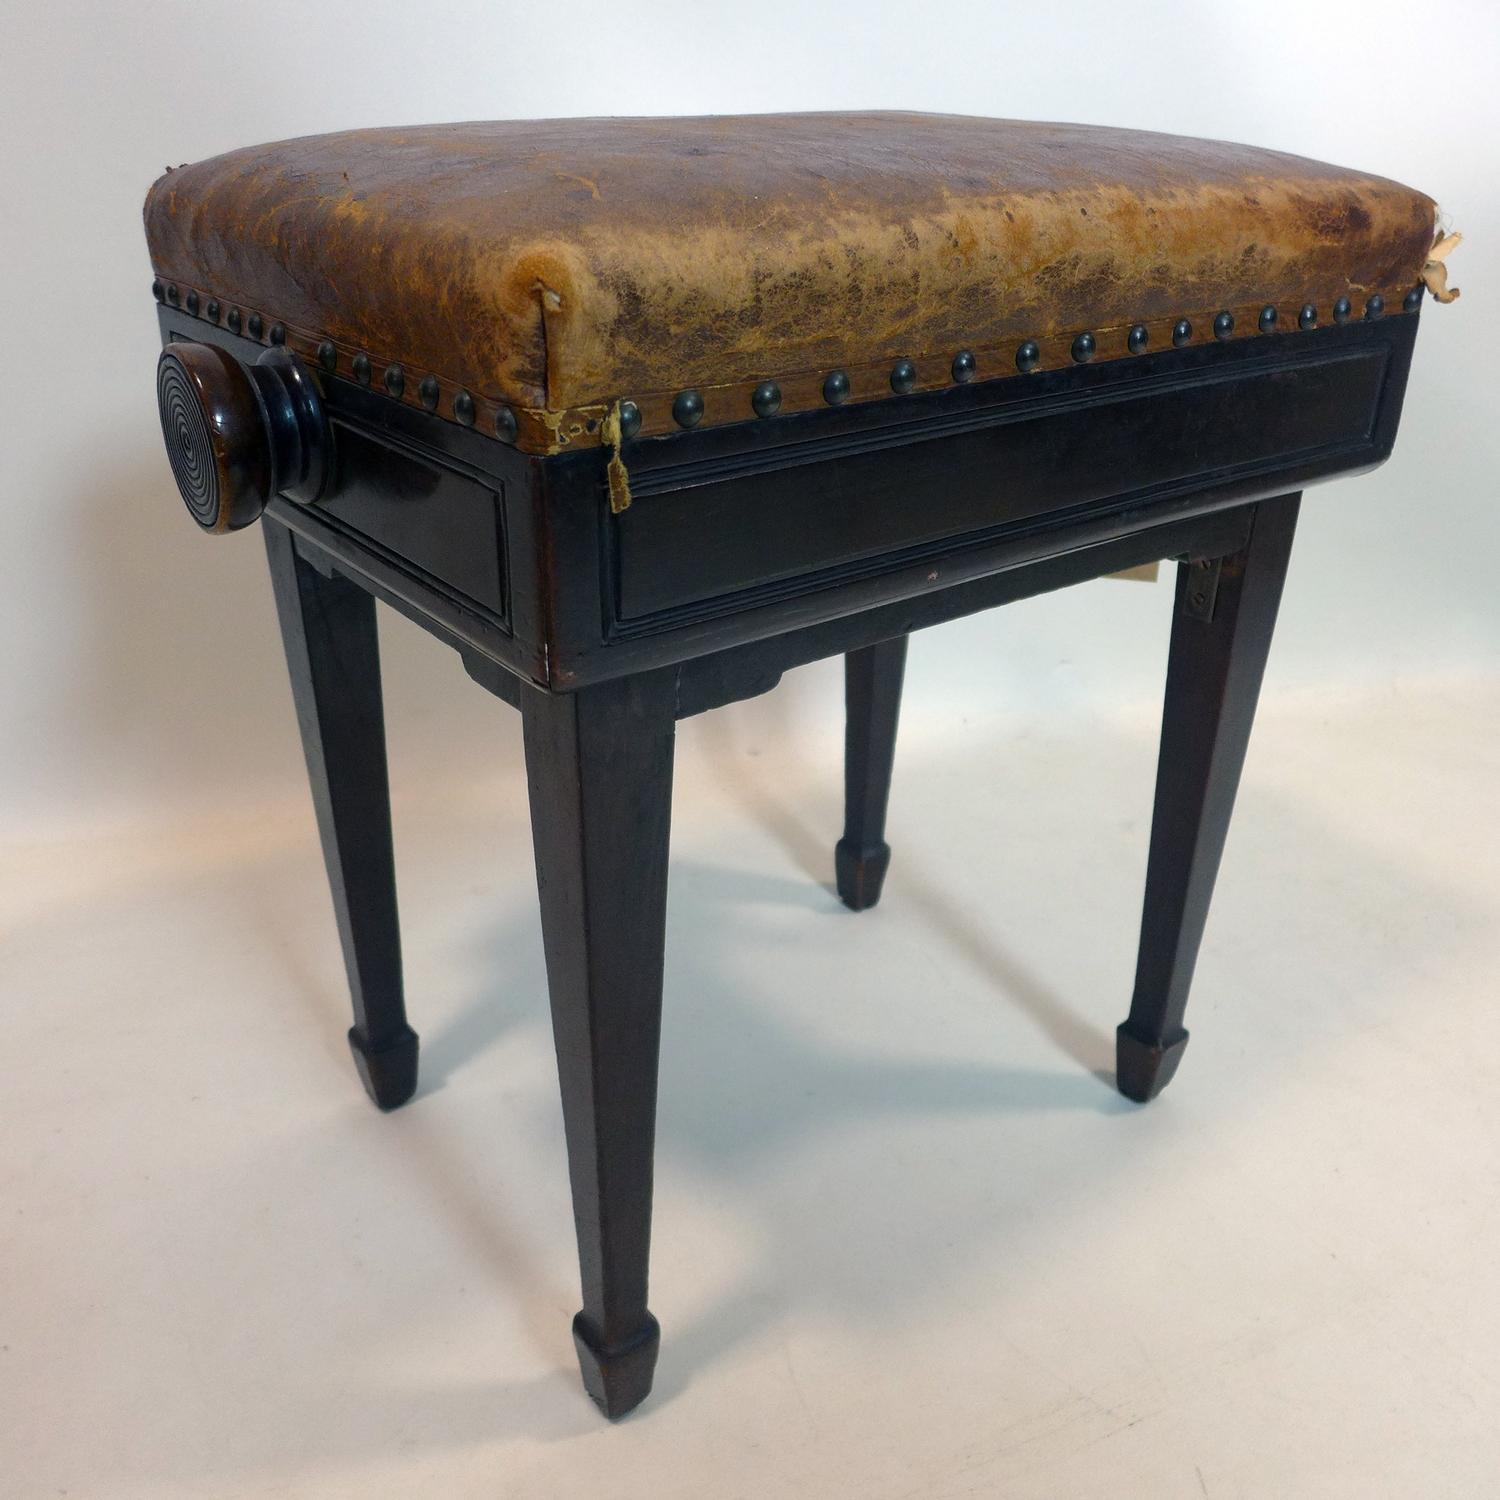 A late 19th century mahogany piano stool, with adjustable leather seat - Image 2 of 2